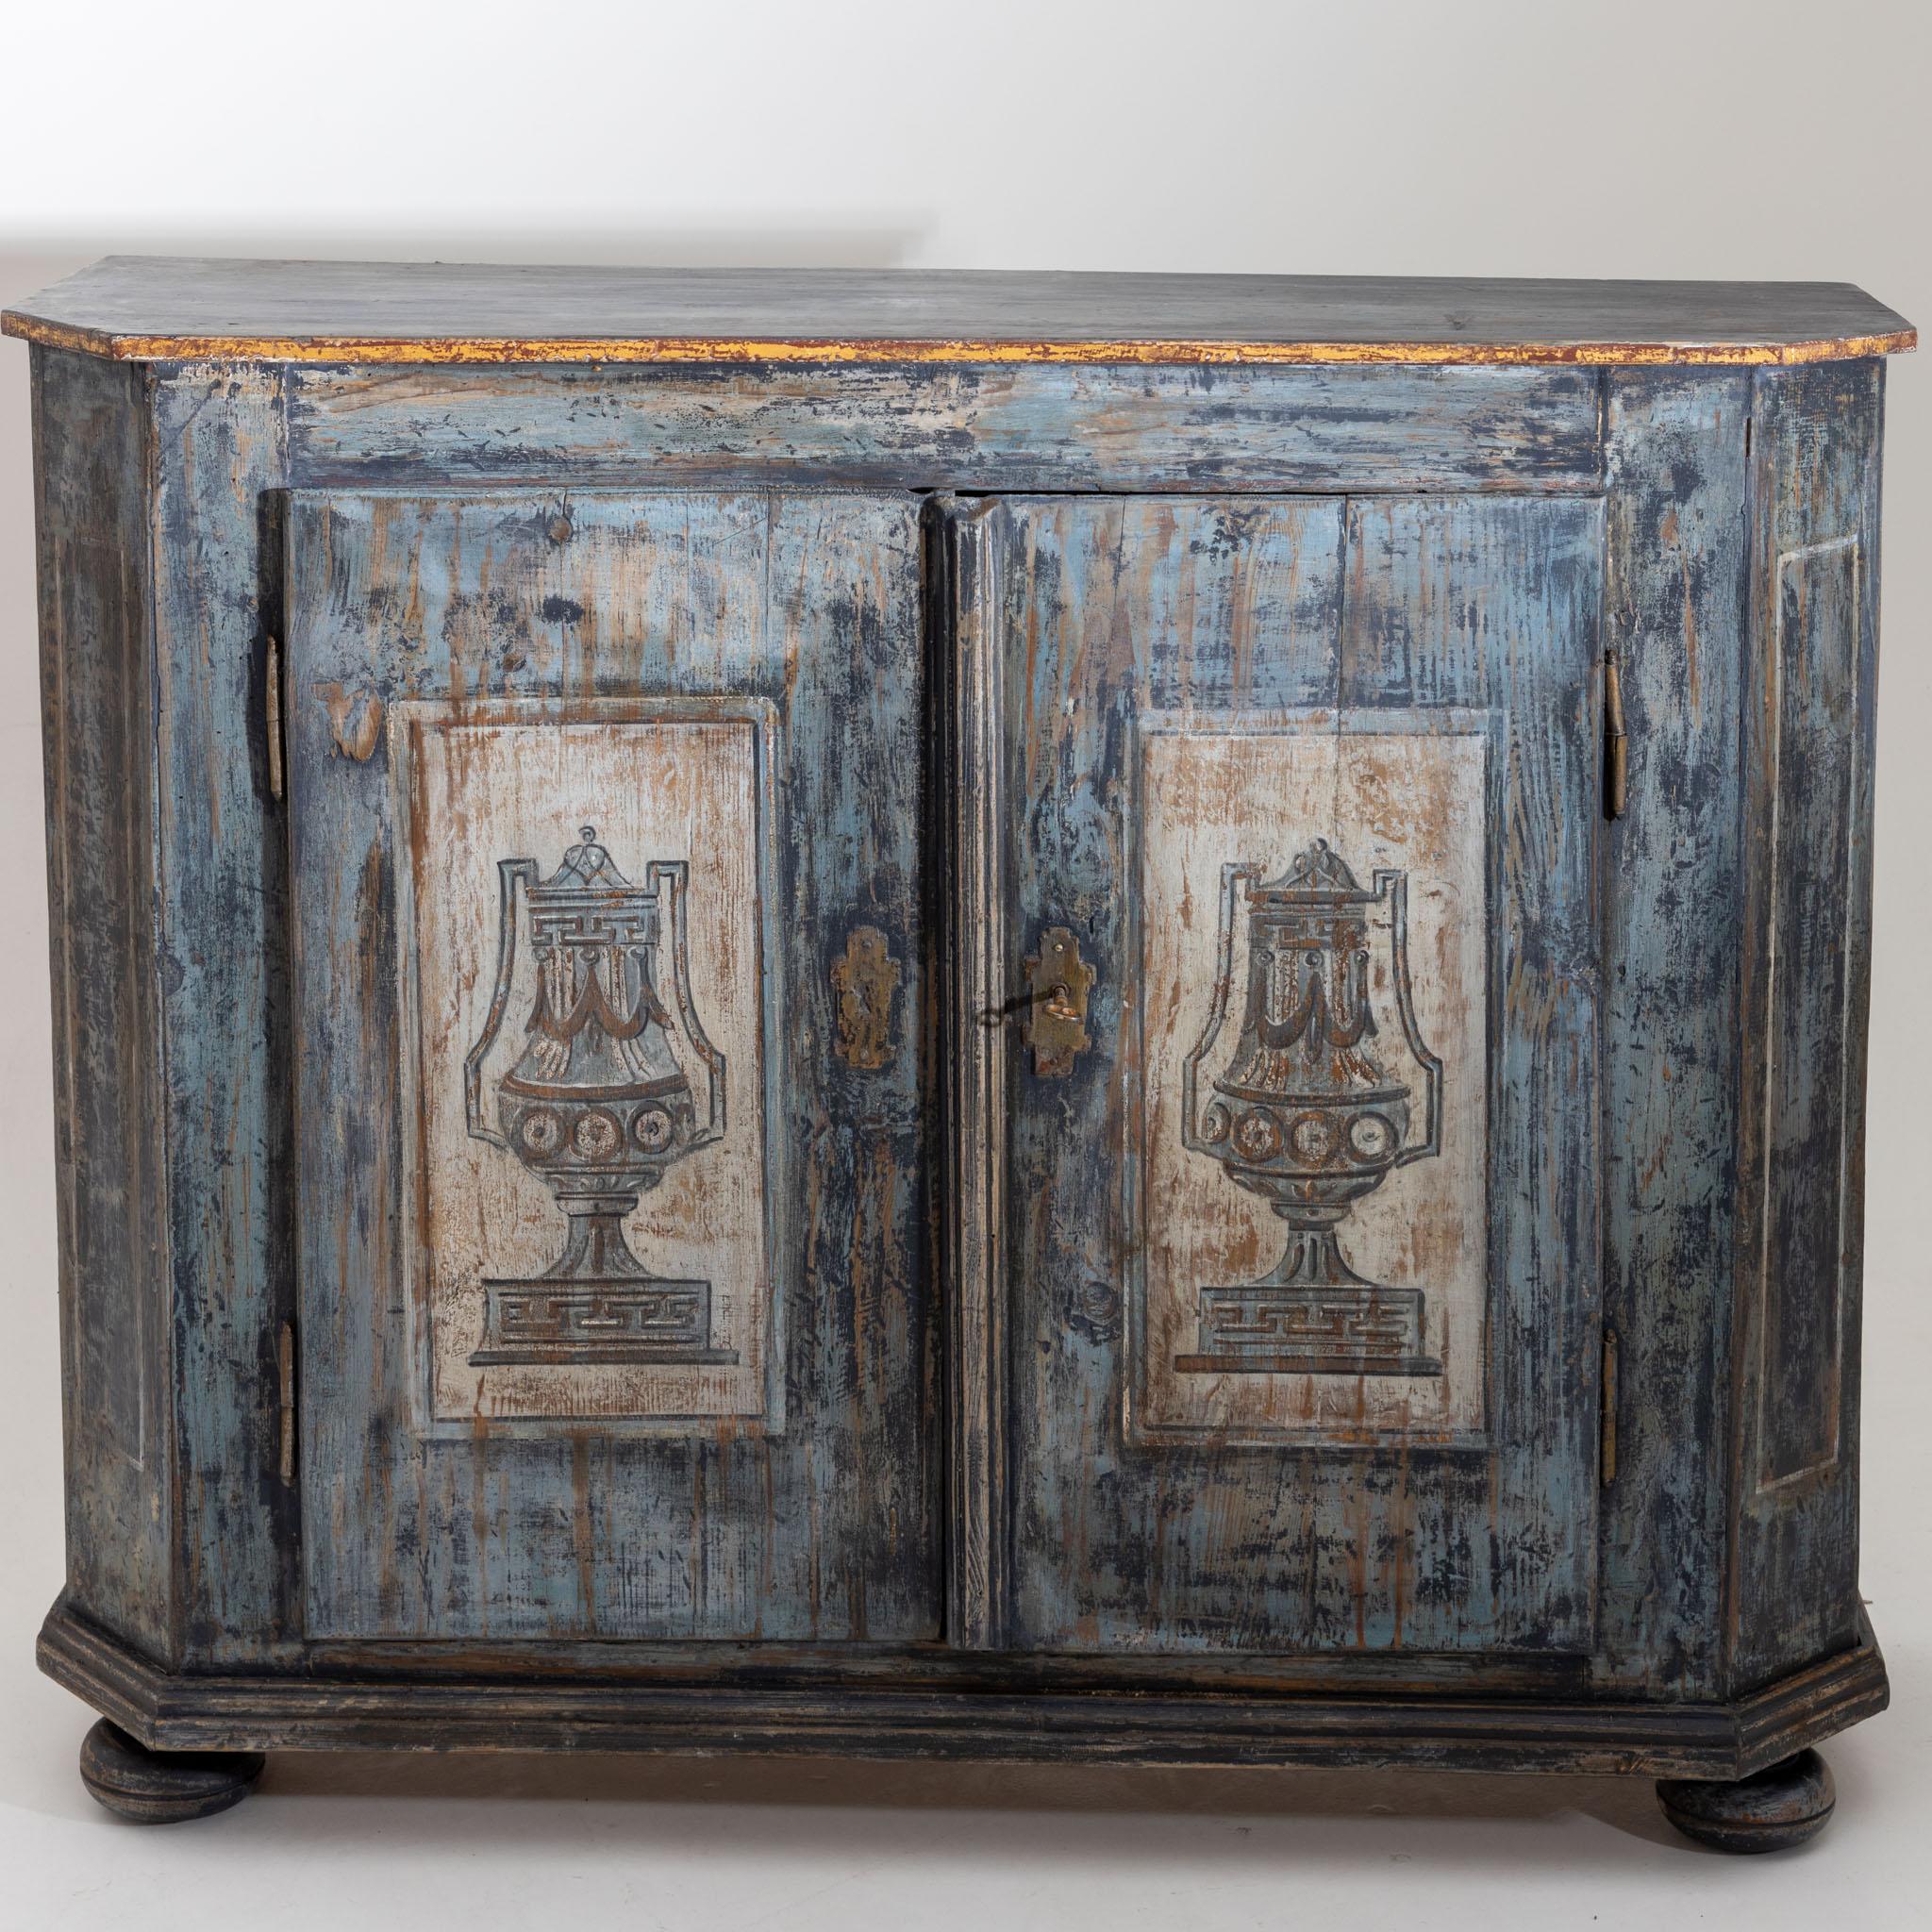 Hand painted provincial sideboard with two doors in blue and grey, 18th century.